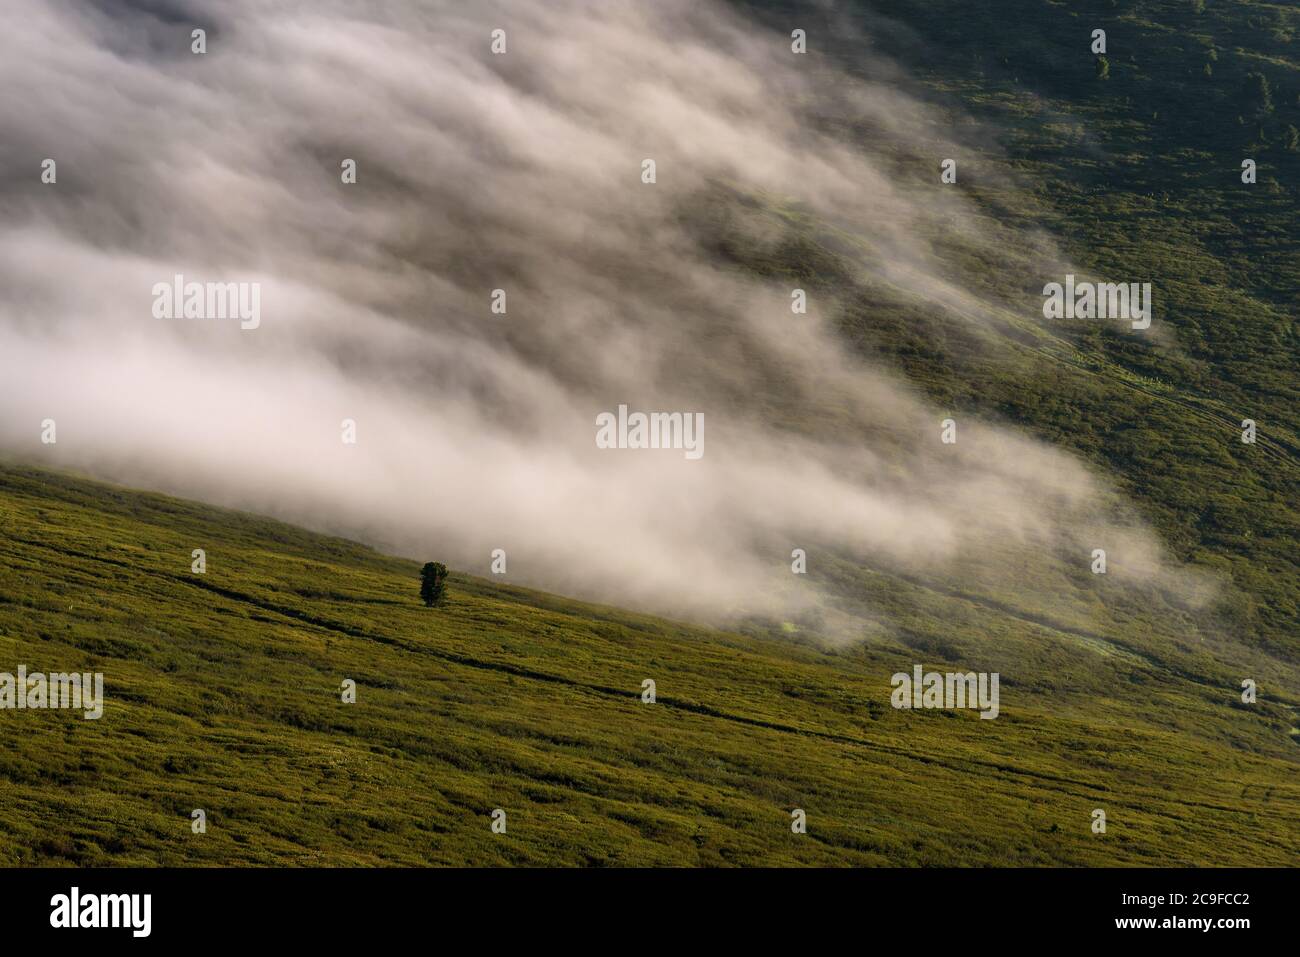 Amazing view with a beautiful white fluffy fog descending from the top of the mountain and cedar among thickets of dwarf birch on the slope of the mou Stock Photo